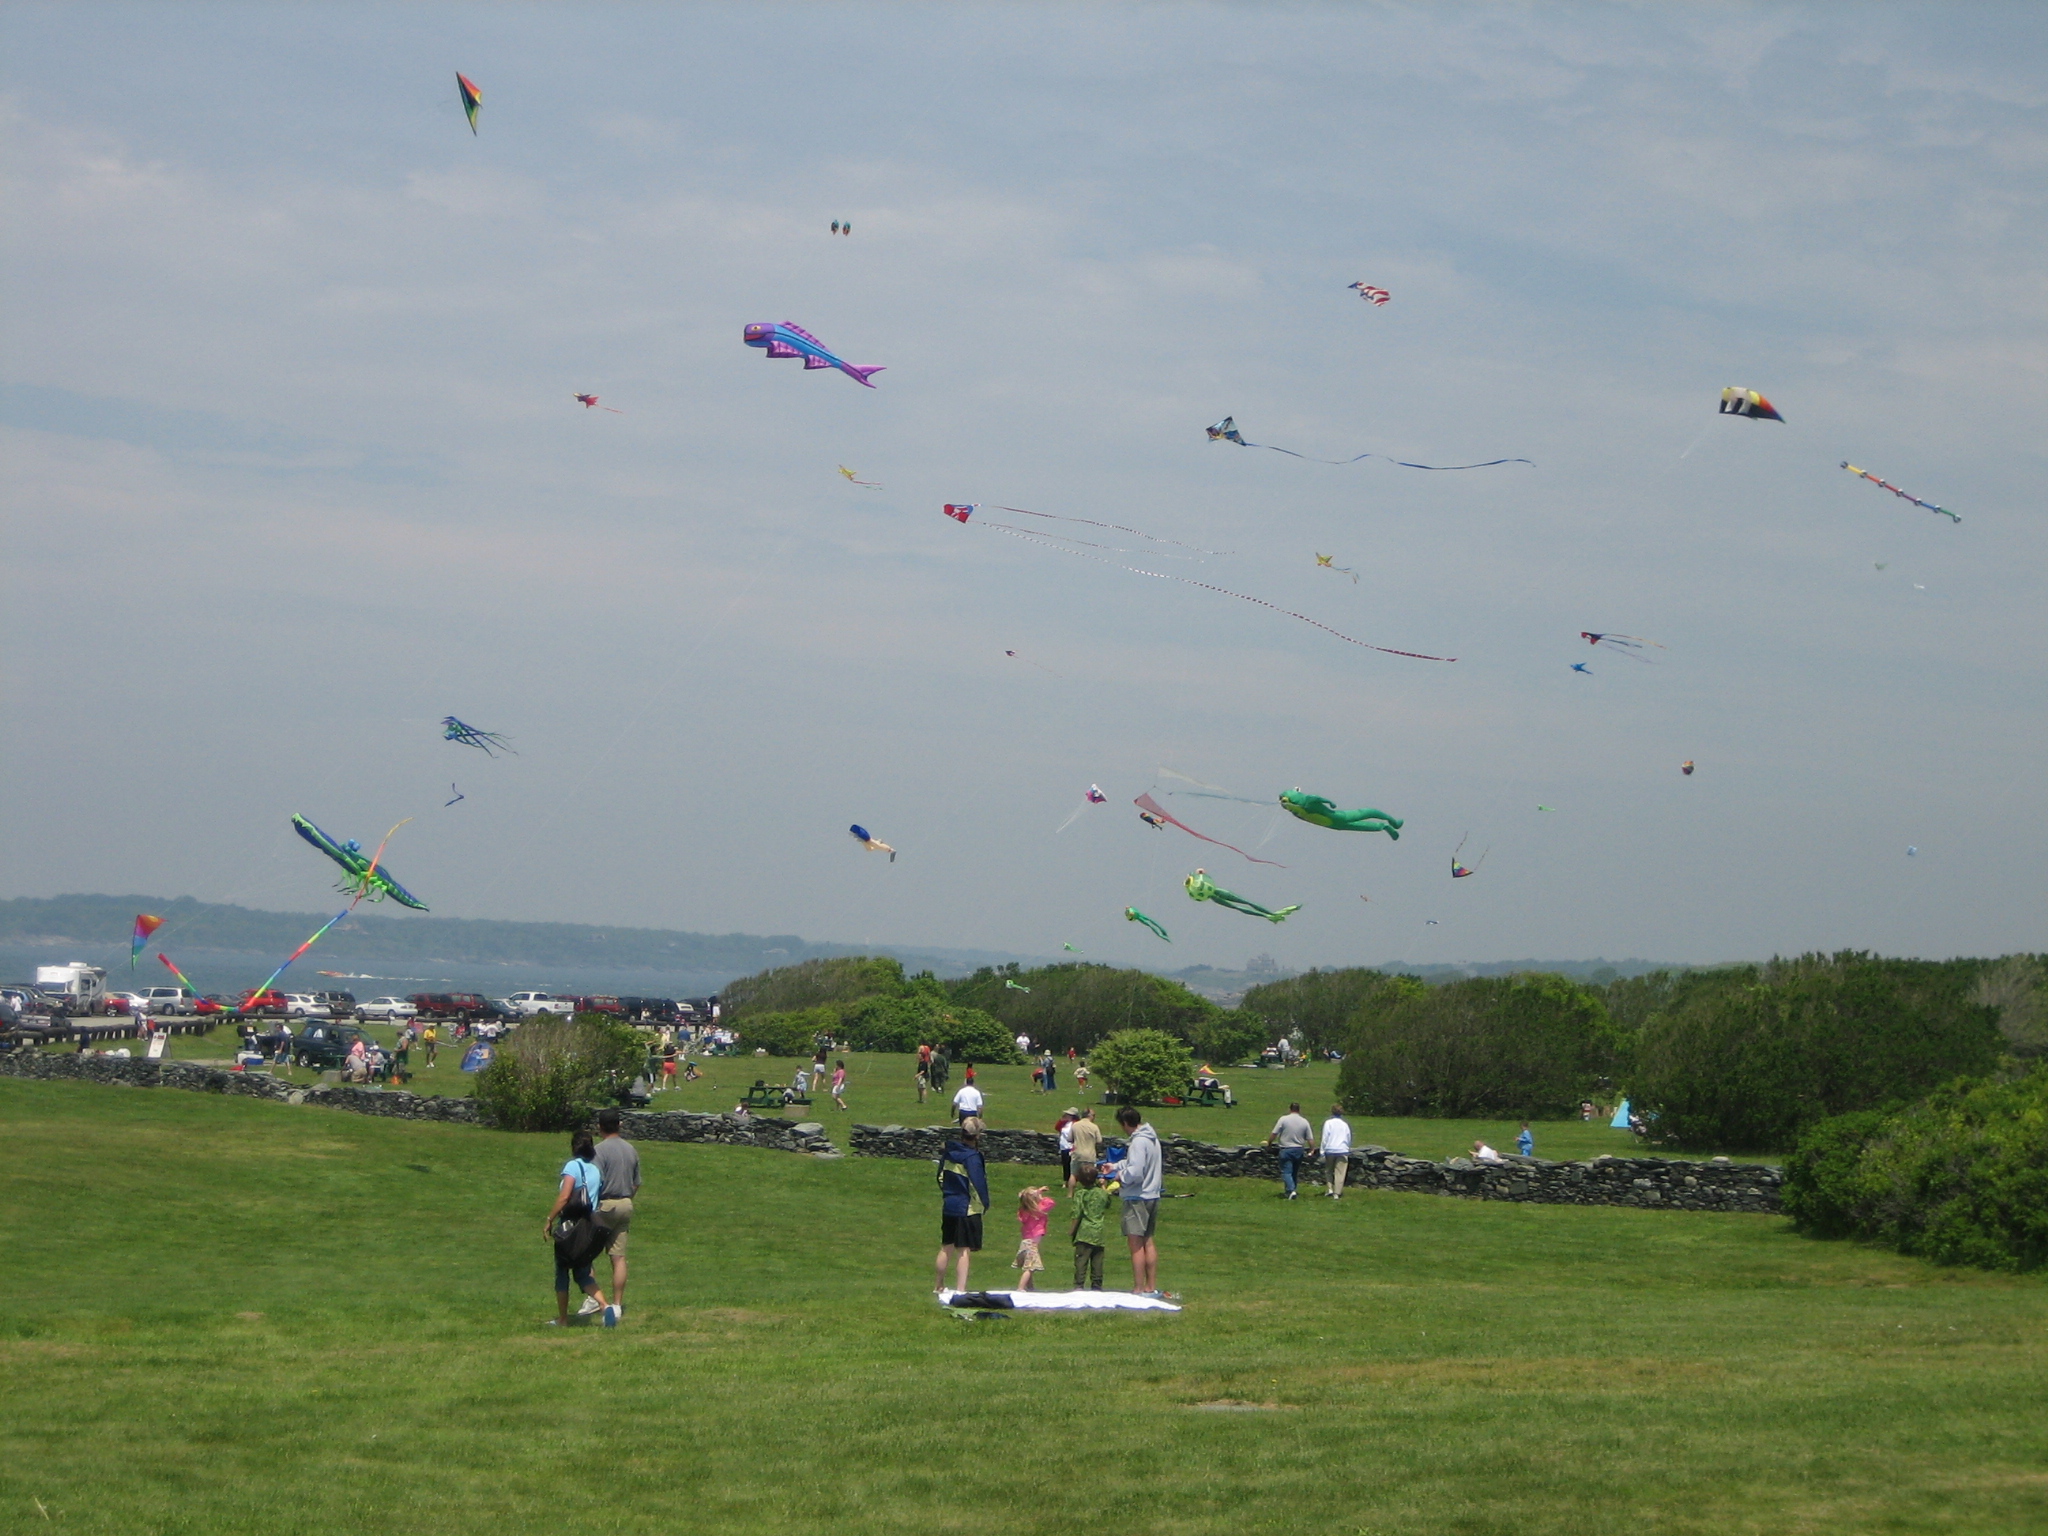 large group of people on grass field flying kites